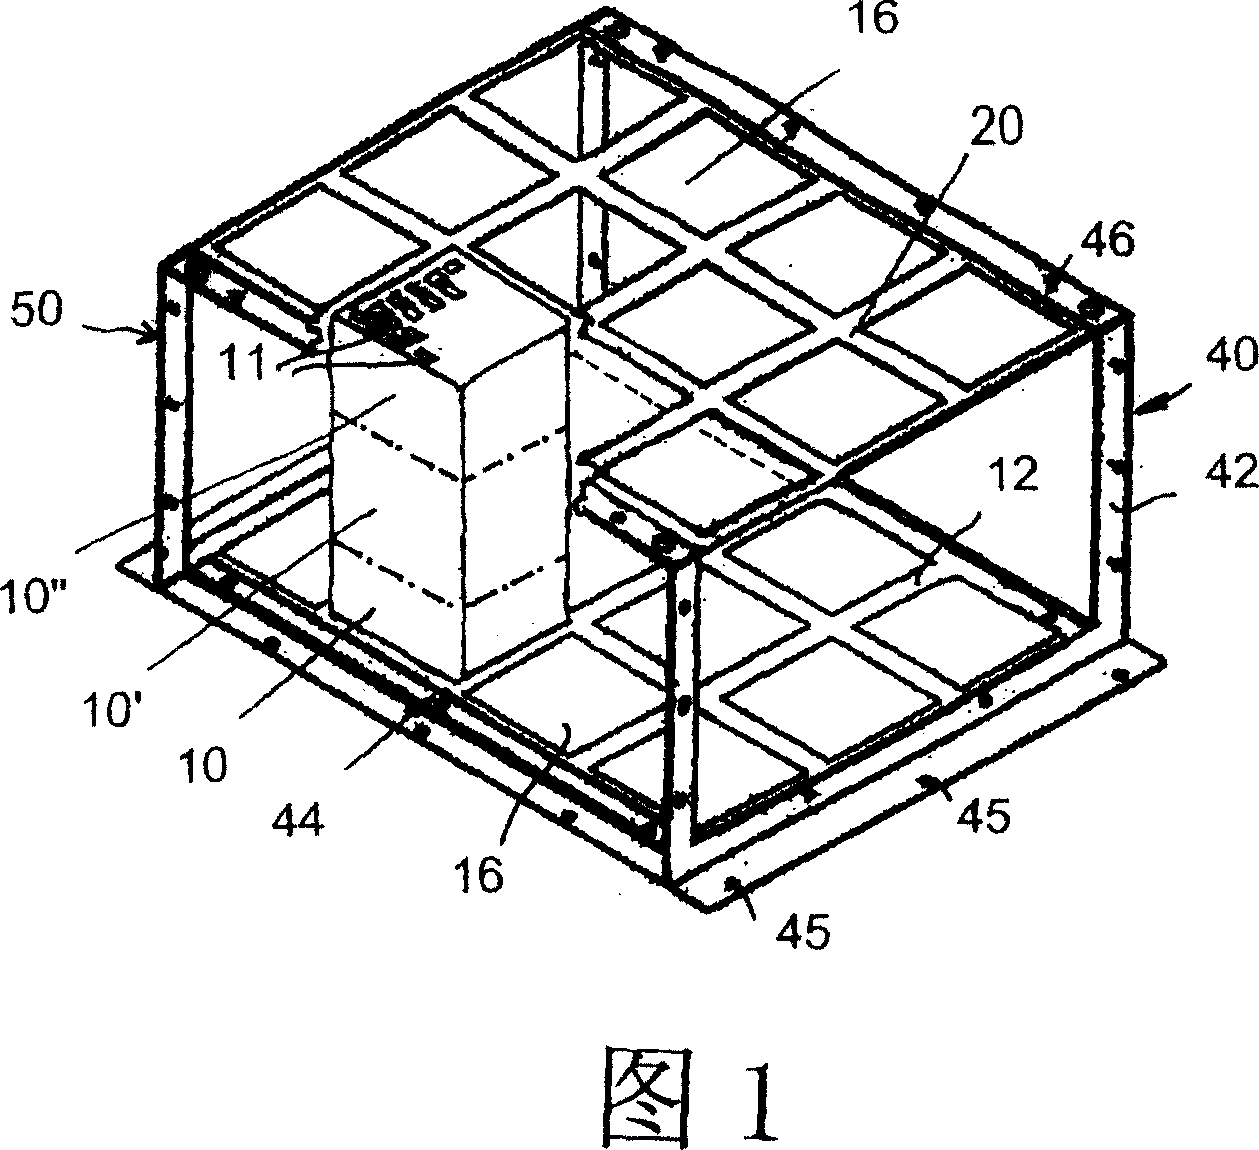 Construction unit for accepting absorbers